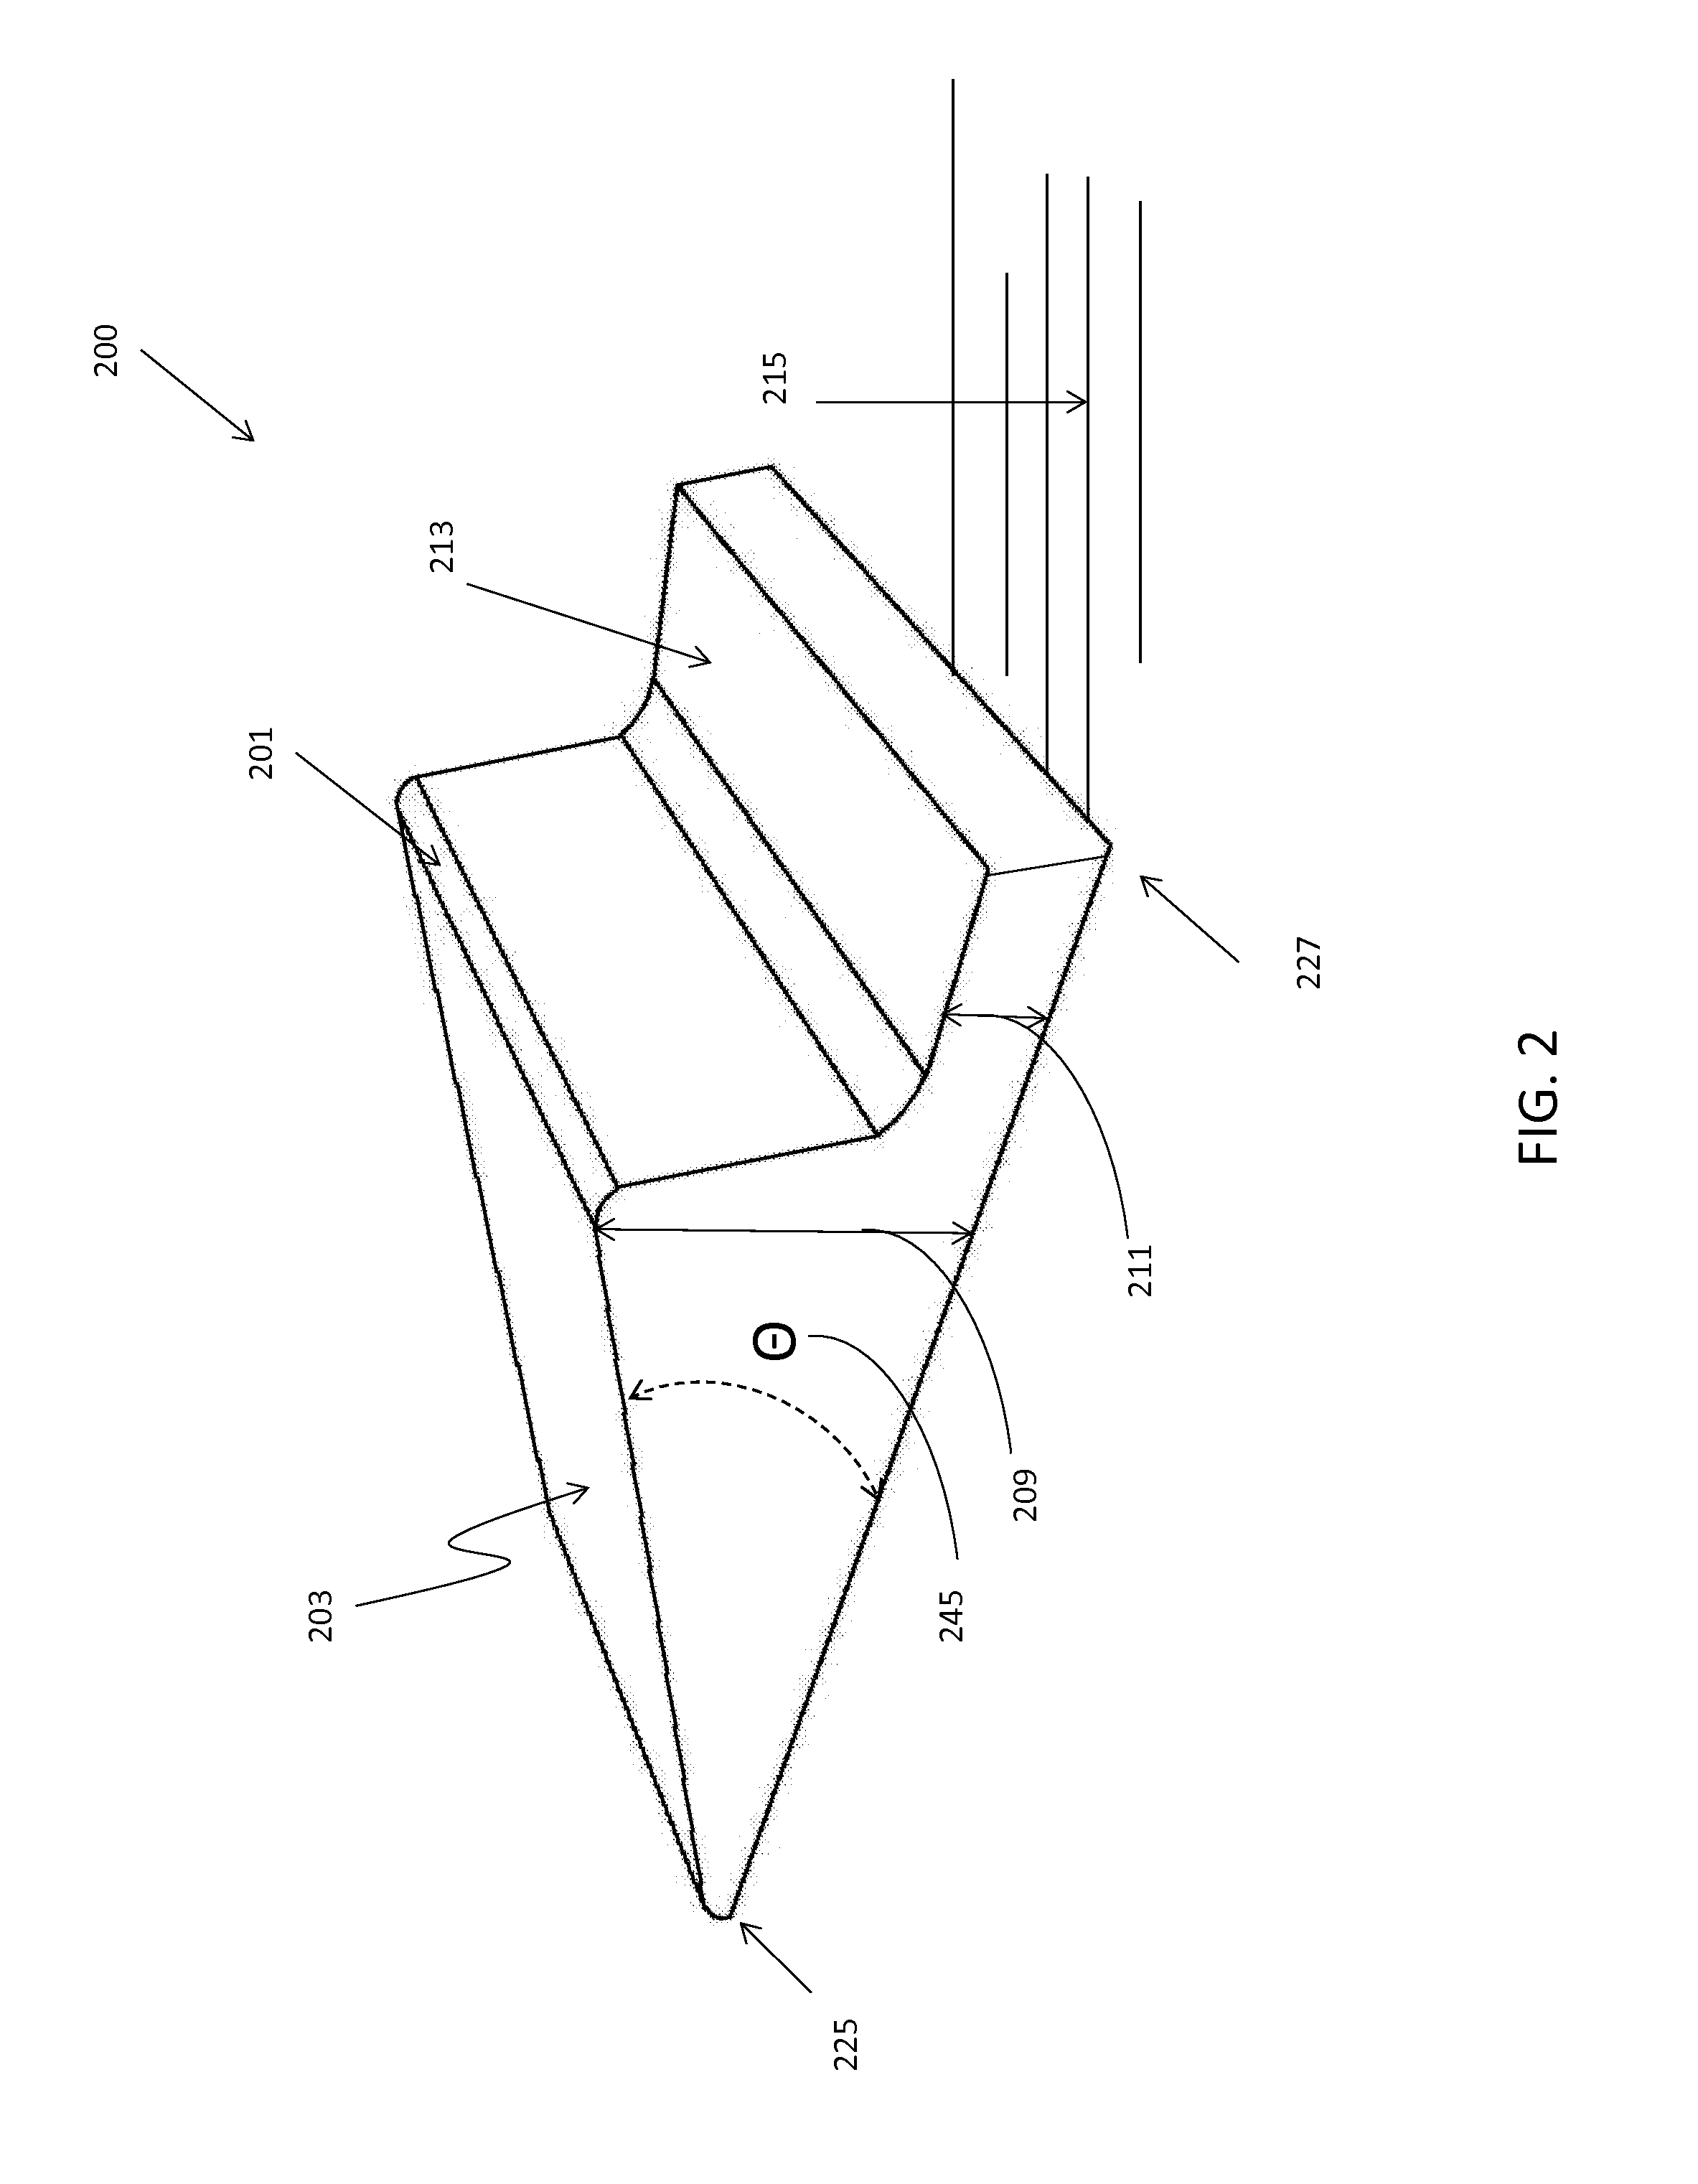 Hemorrhoid pain relieving apparatus and method